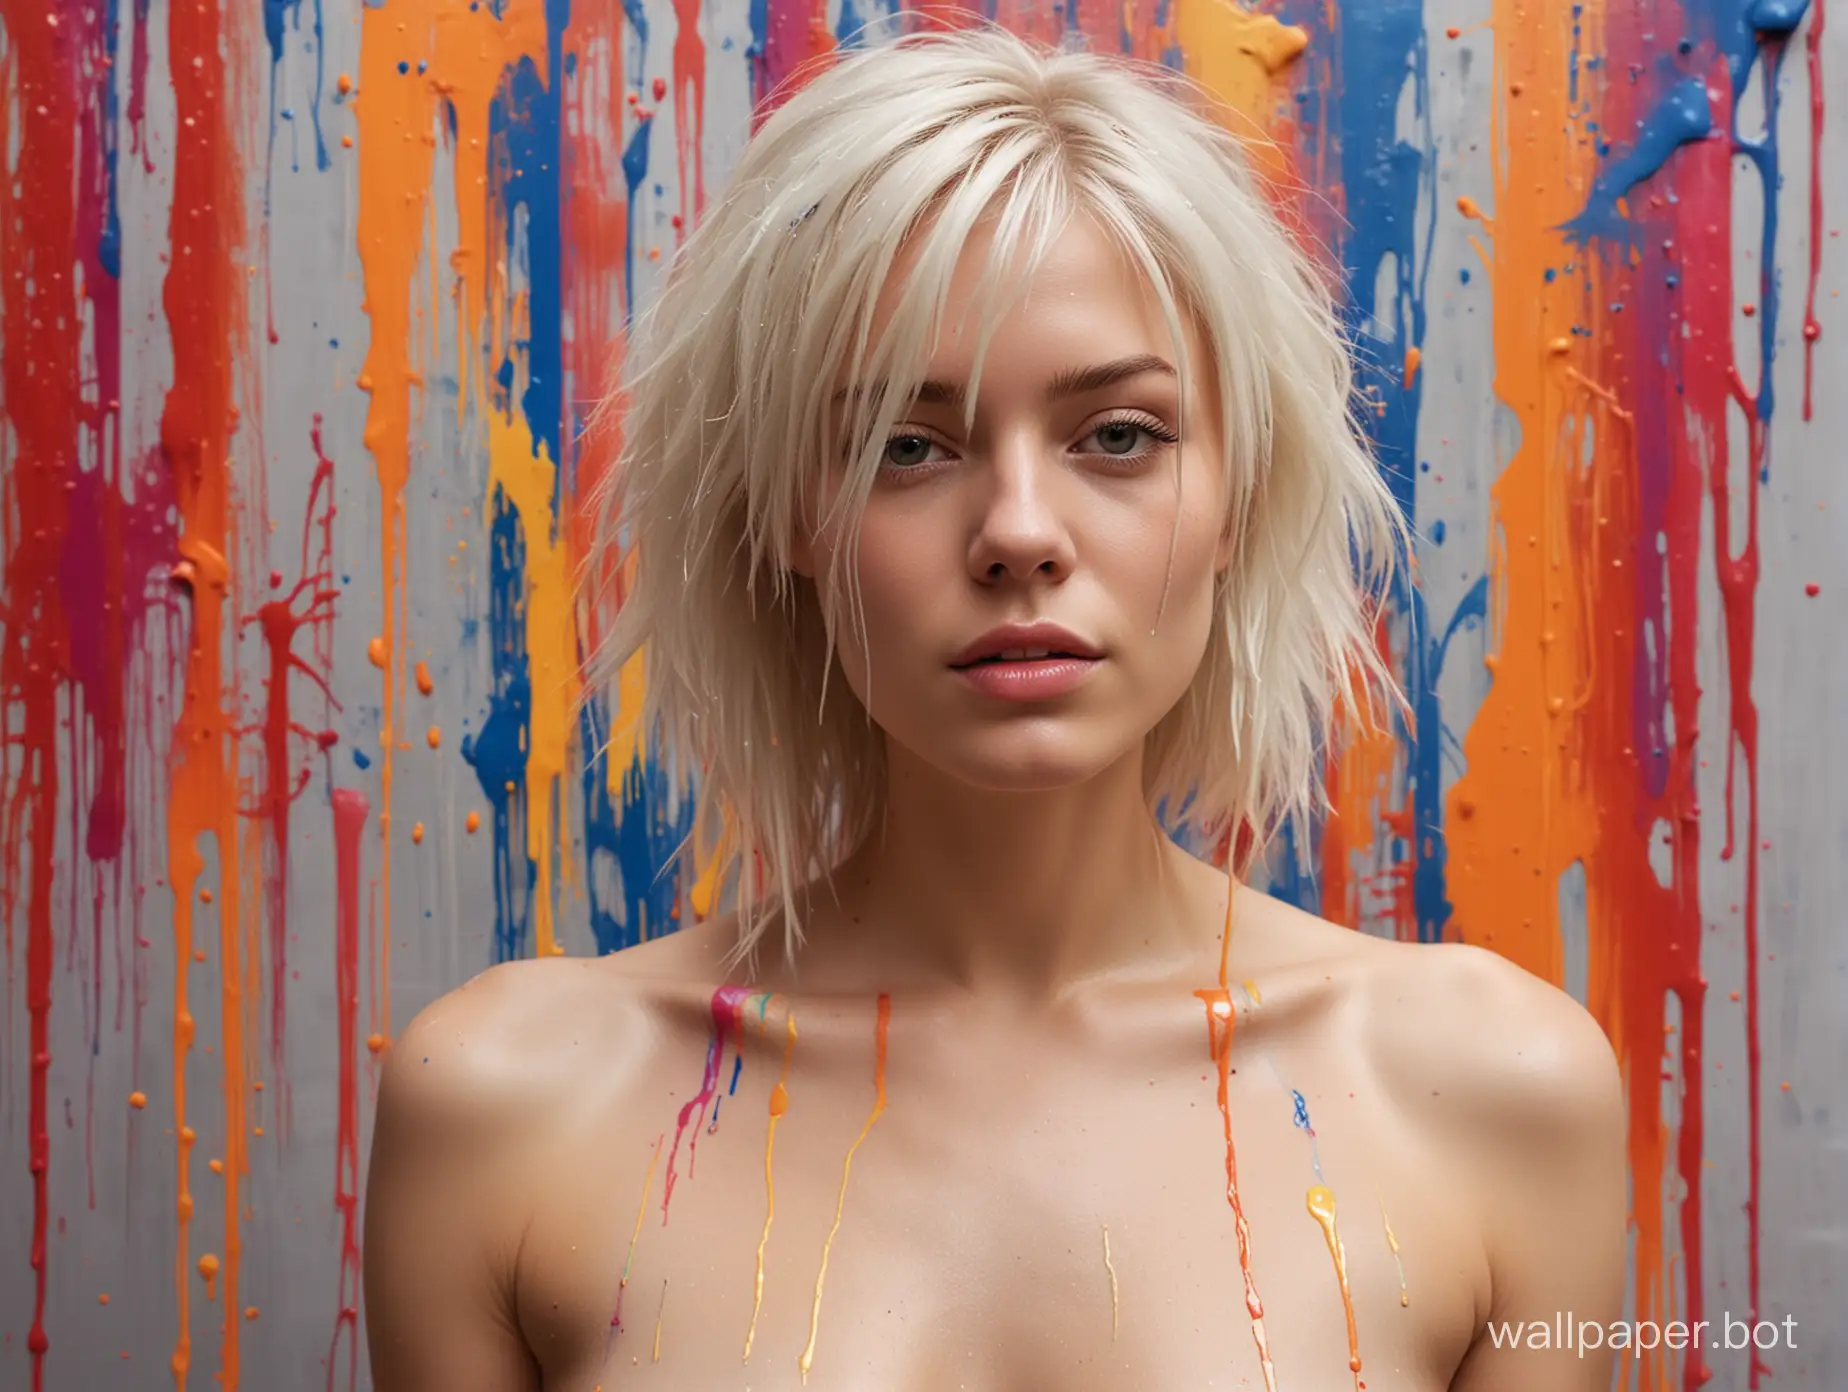 Vibrant-Nude-Woman-Covered-in-Dripping-Paint-Artistic-Beauty-Captured-in-a-Provocative-Photograph